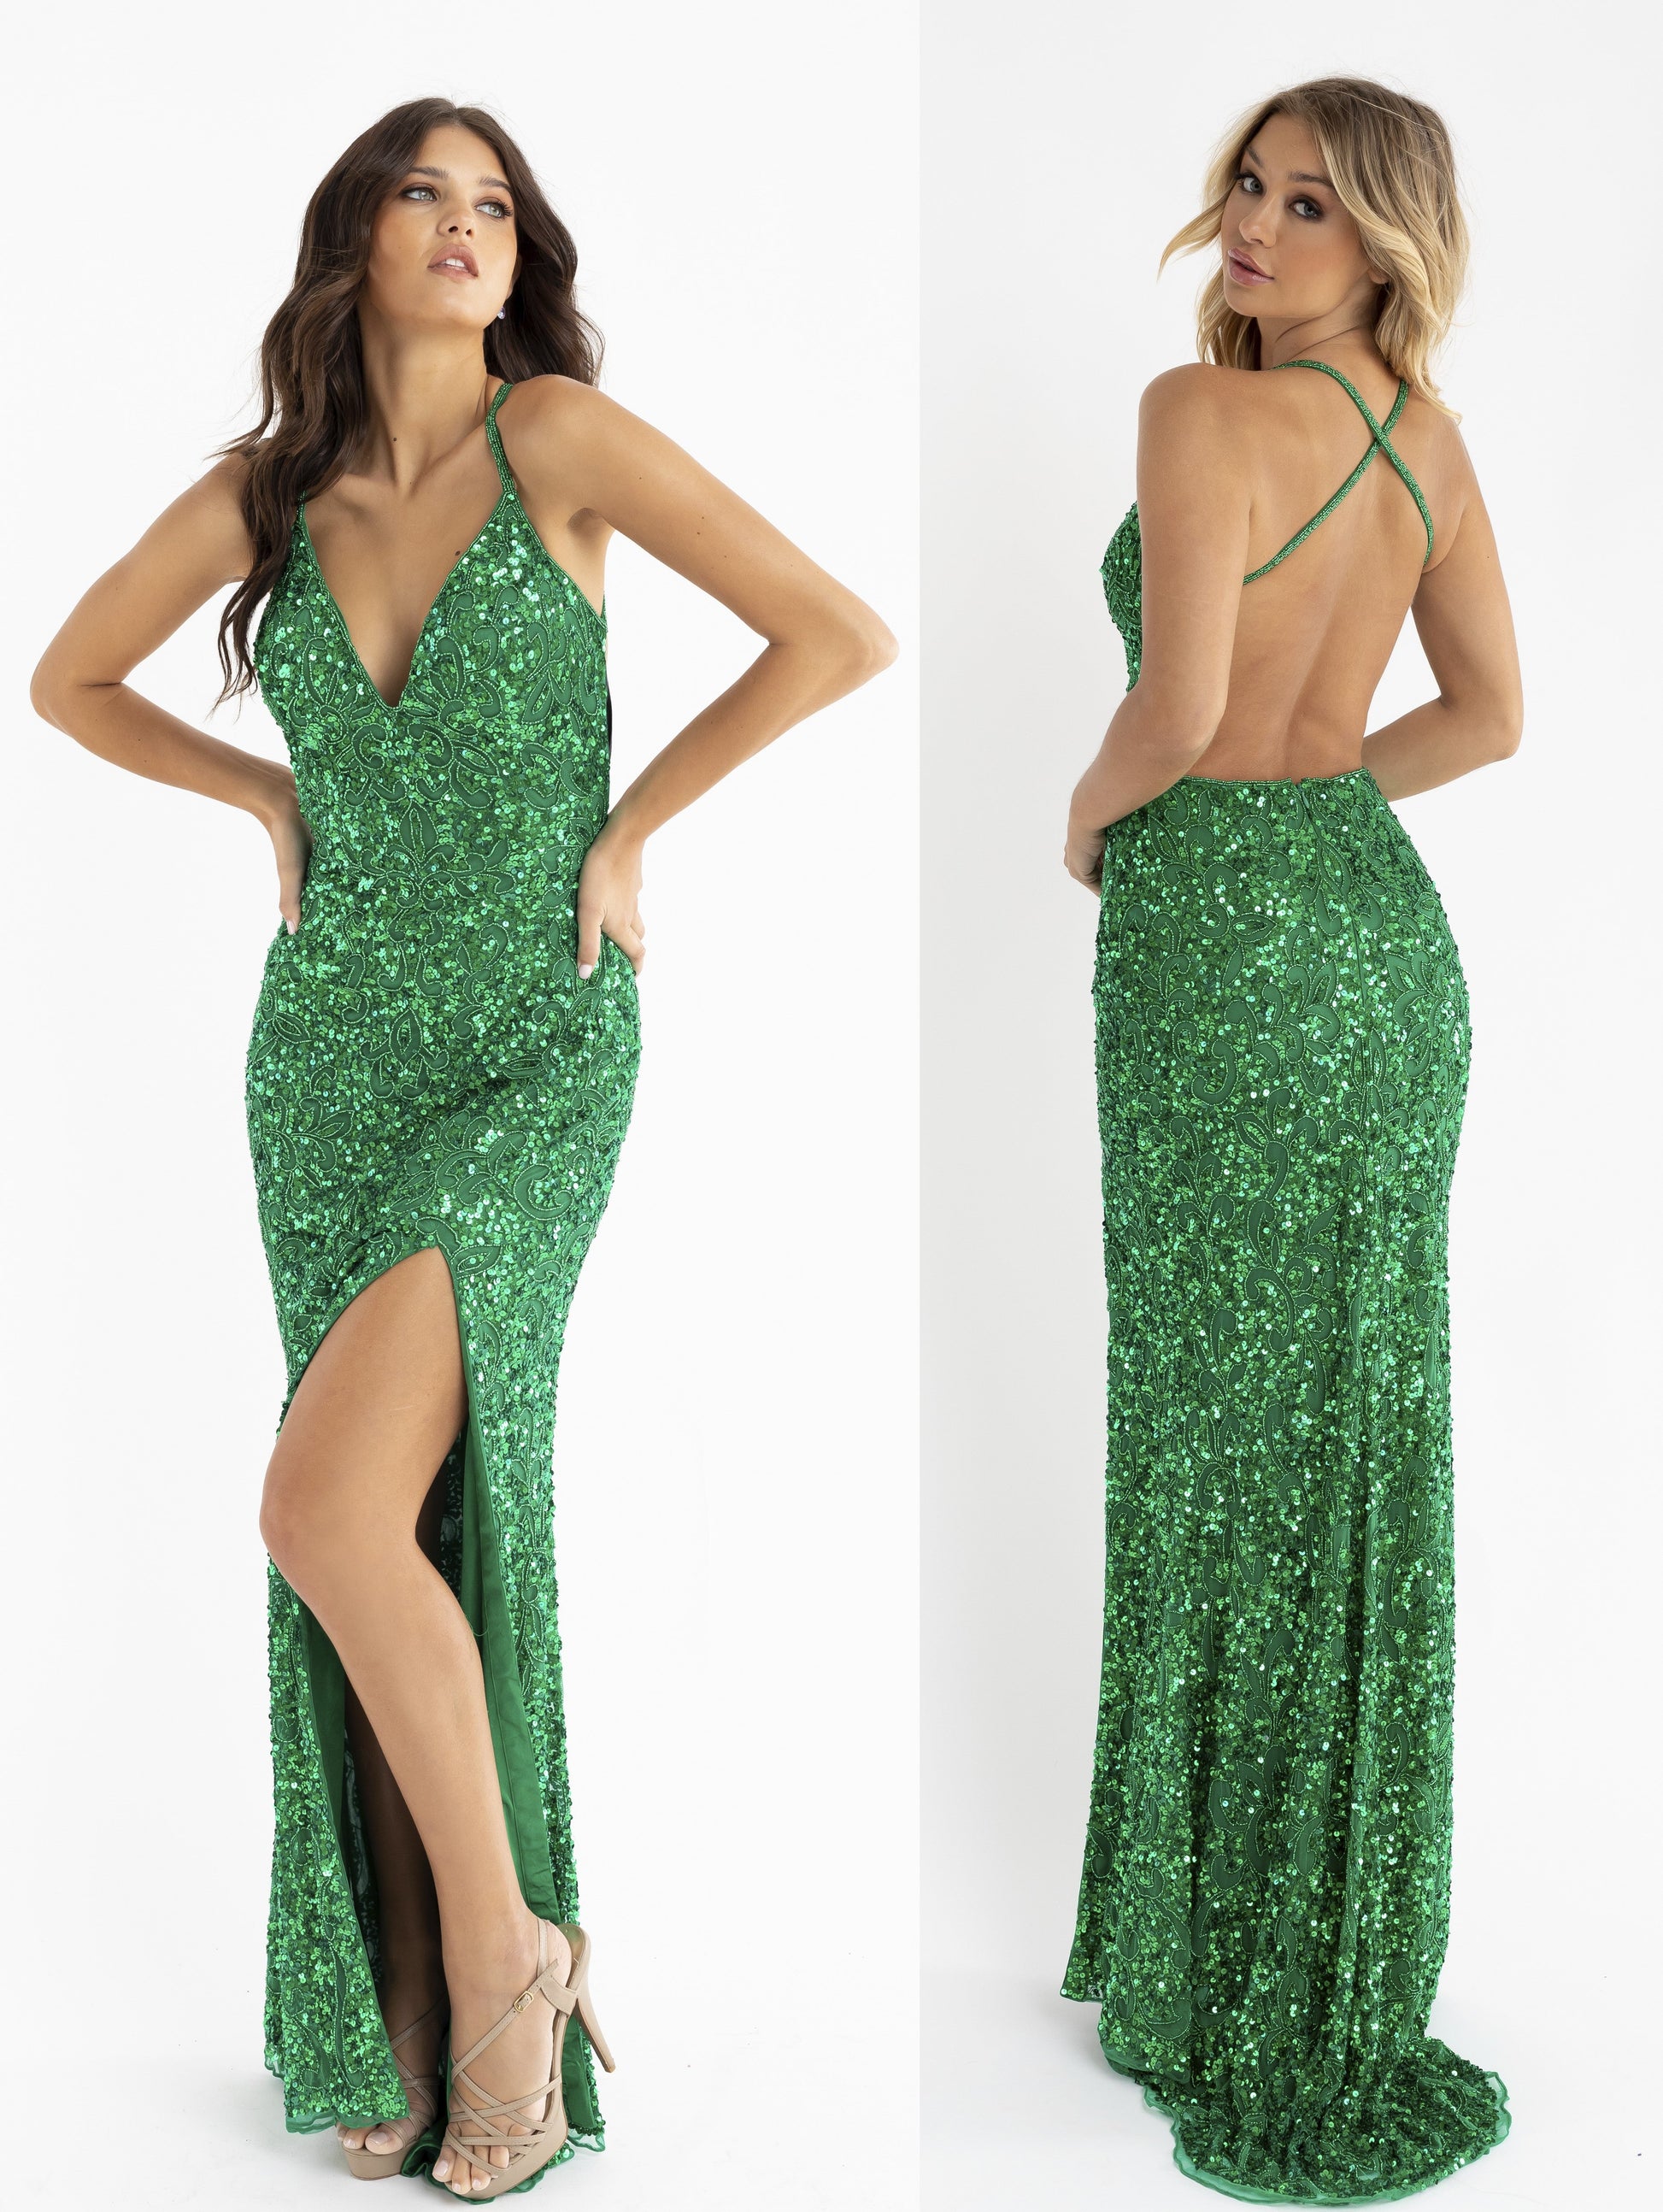 PRIMAVERA-COUTURE-3295-EMERALD-GREEN-FRONT-V-NECKLINE-BACKLESS-SLIT-ALL-SEQUINS-BEADED-DESIGNPrimavera Couture 3295 Exclusive  Prom Dress, Formal Evening Gown.  This exclusive prom dress is designed with sequins throughout.  I has a V neckline with beaded spaghetti straps that crisscross in the open back.  It is long with a left side slit.  Available Colors:  FUSHIA,CREAM,EMERALD,IVORY,PEACOCK,BLACK,MIDNIGHT,NEON LILAC,NEON PINK,FORREST GREEN,PURPLE,TURQUOISE,CORAL,BLUE,RED,LIGHT BLUE,NEON SAGE